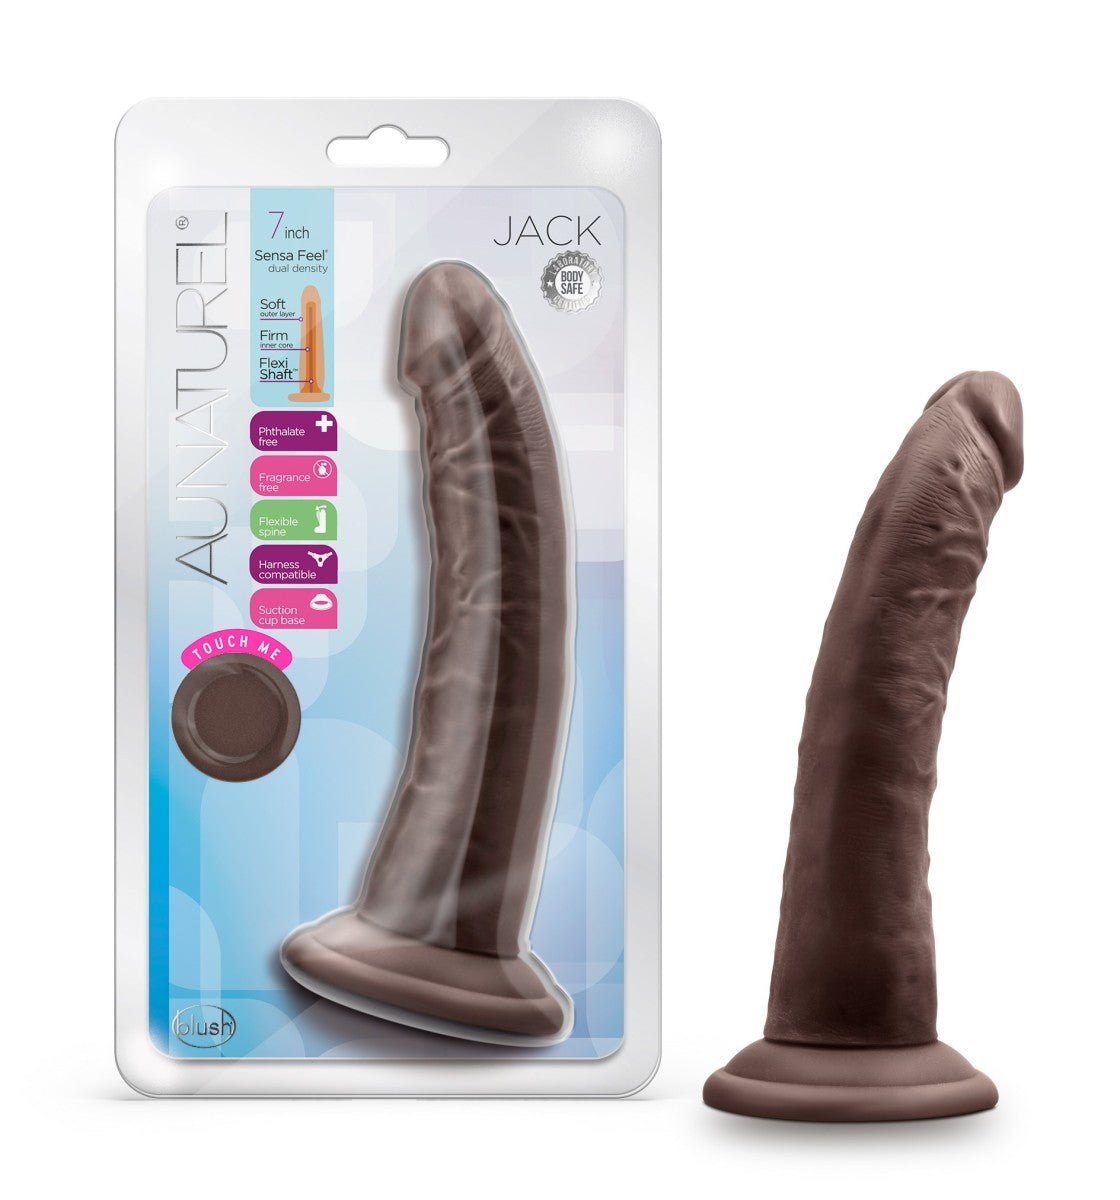 Au Naturel Jack Realistic Chocolate 7.5-Inch Long Dildo With Suction Cup Base